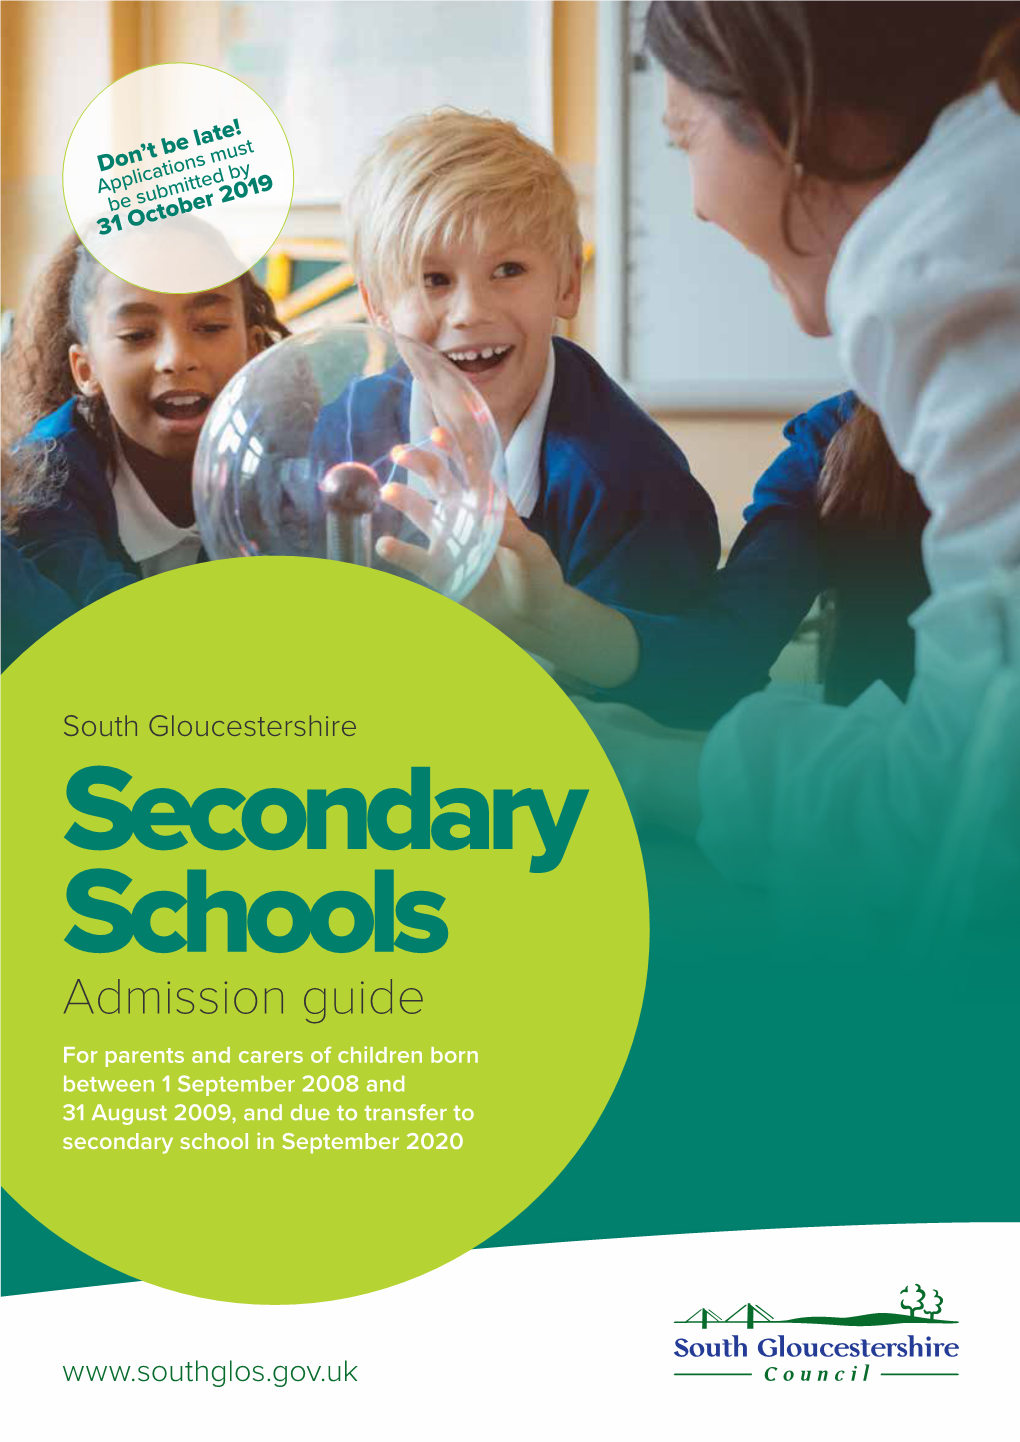 Admission Guide for Parents and Carers of Children Born Between 1 September 2008 and 31 August 2009, and Due to Transfer to Secondary School in September 2020